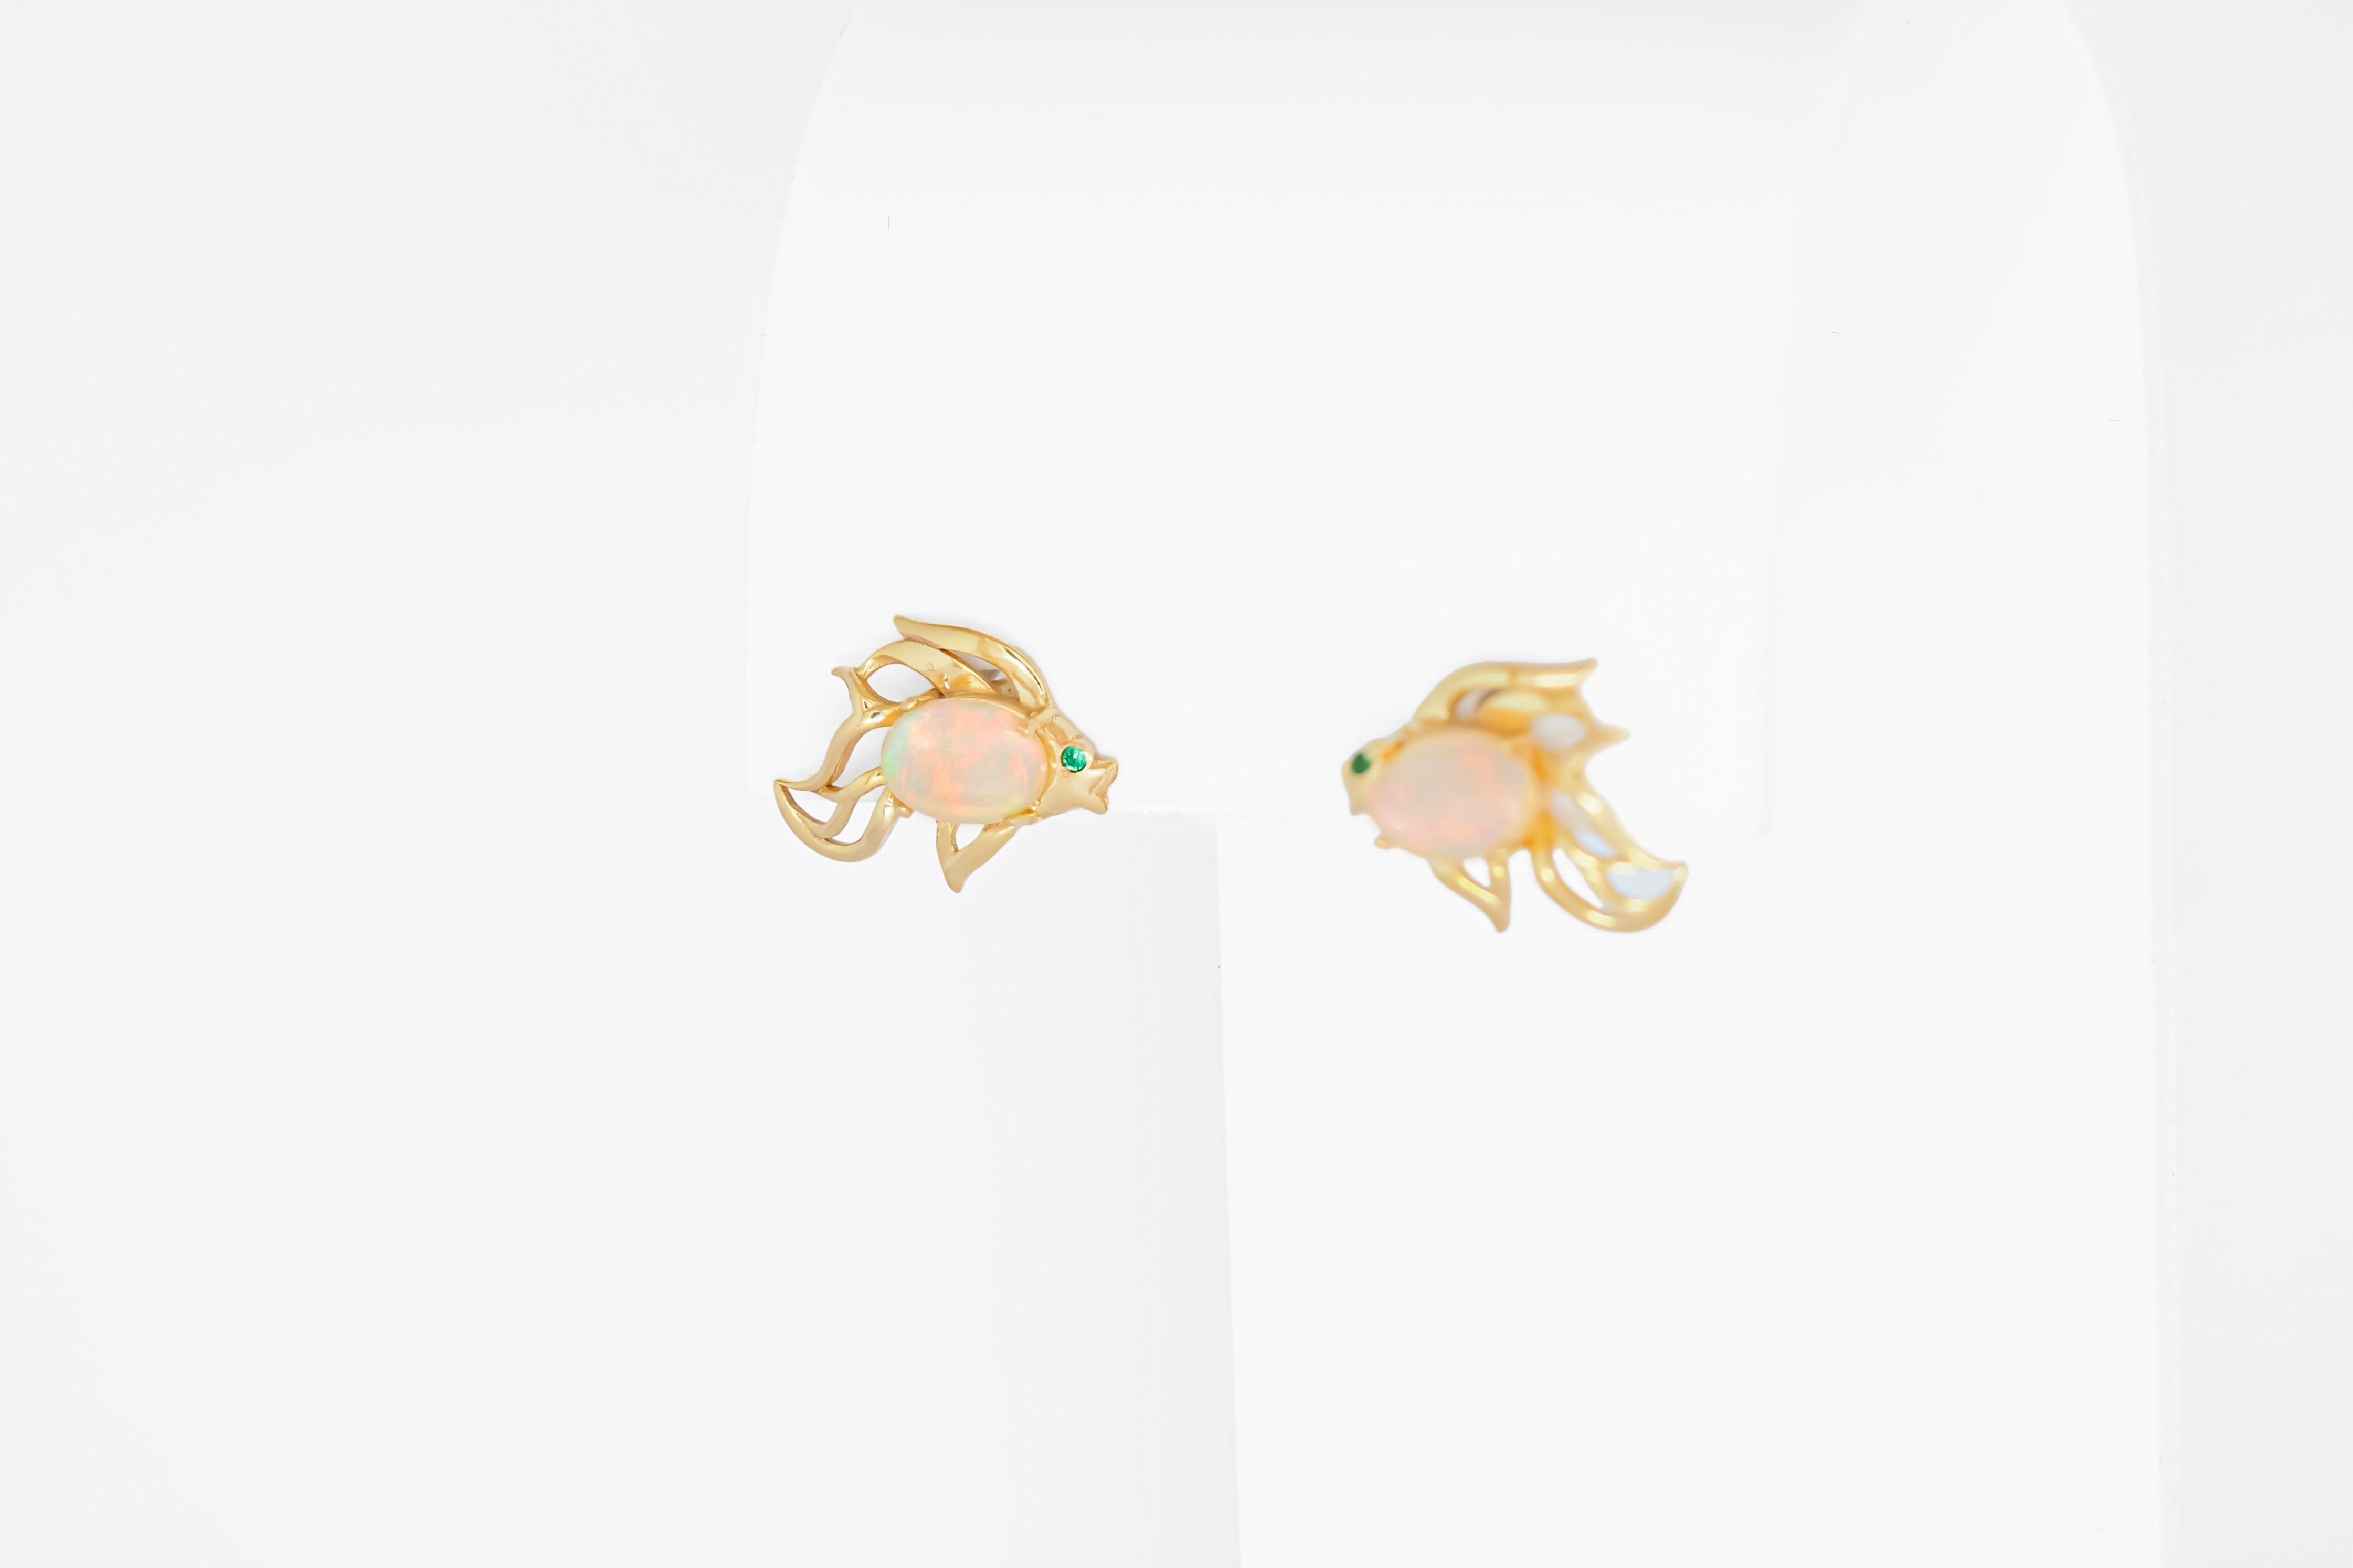 3 pair of earrings studs:  Fish, crab and flower  2